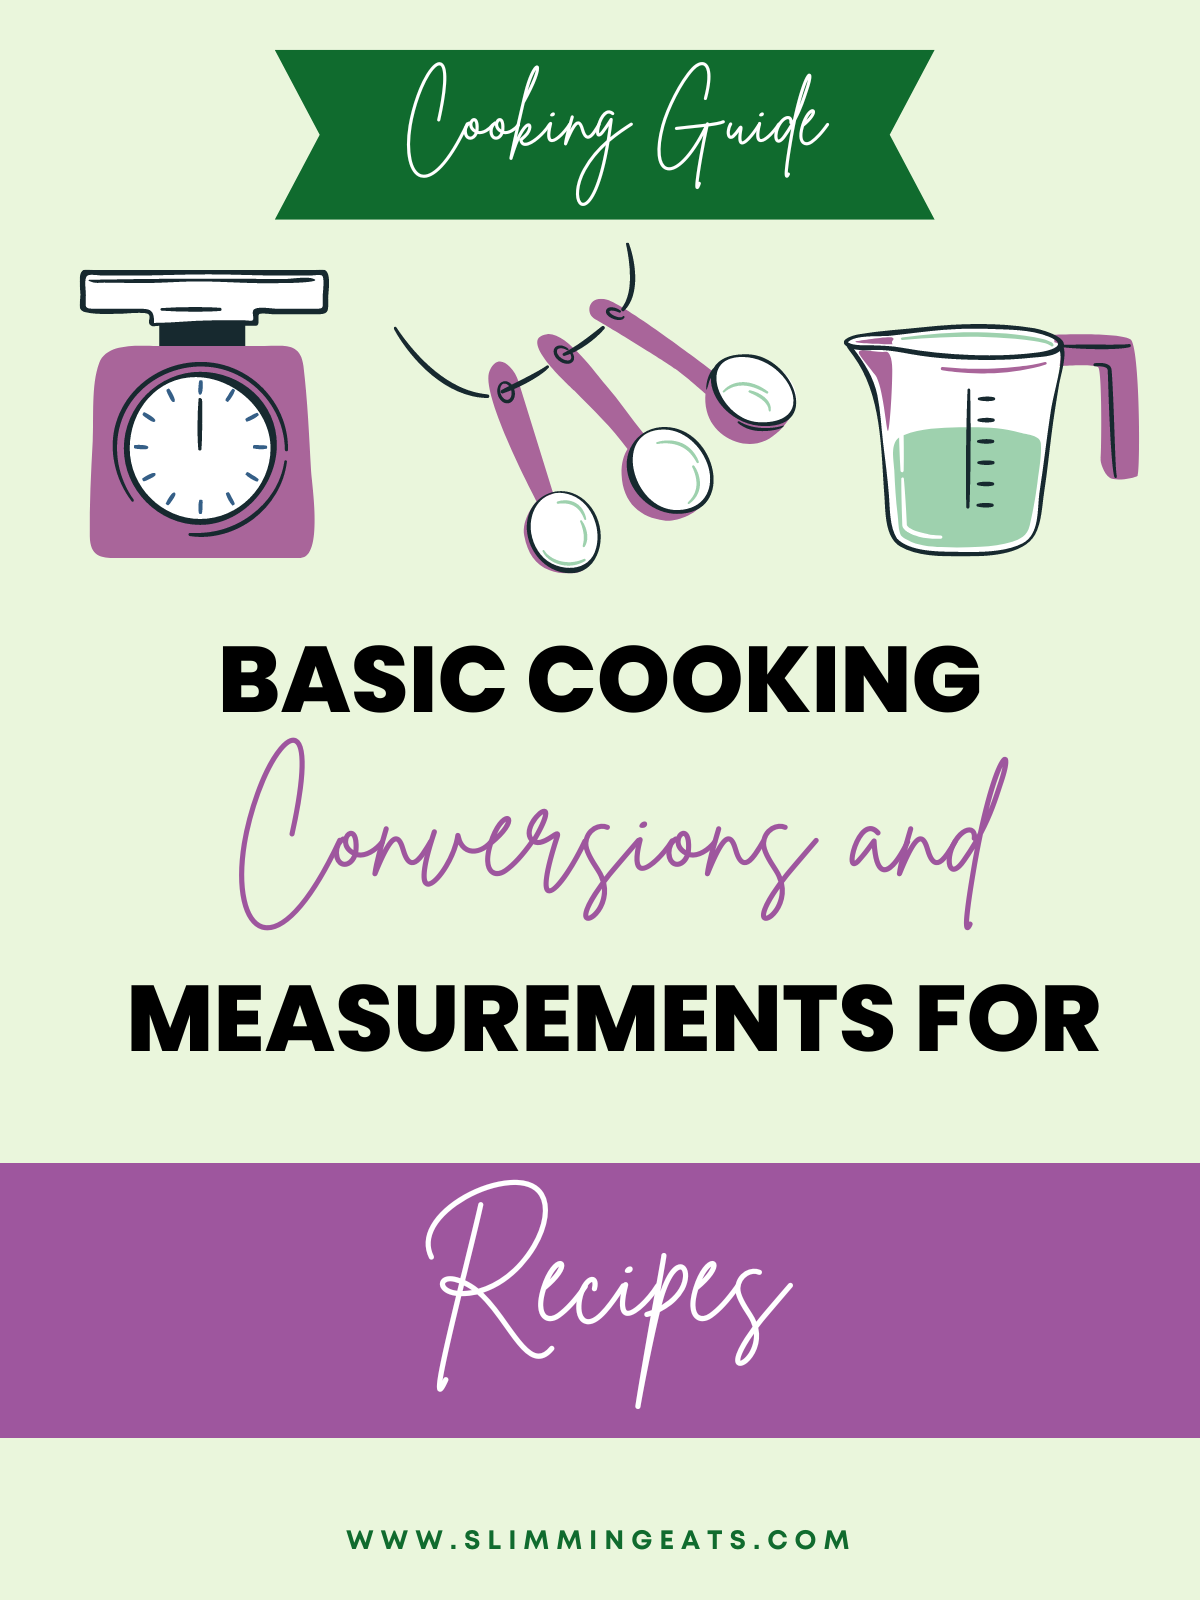 Basic Cooking Conversions and Measurements for Recipes